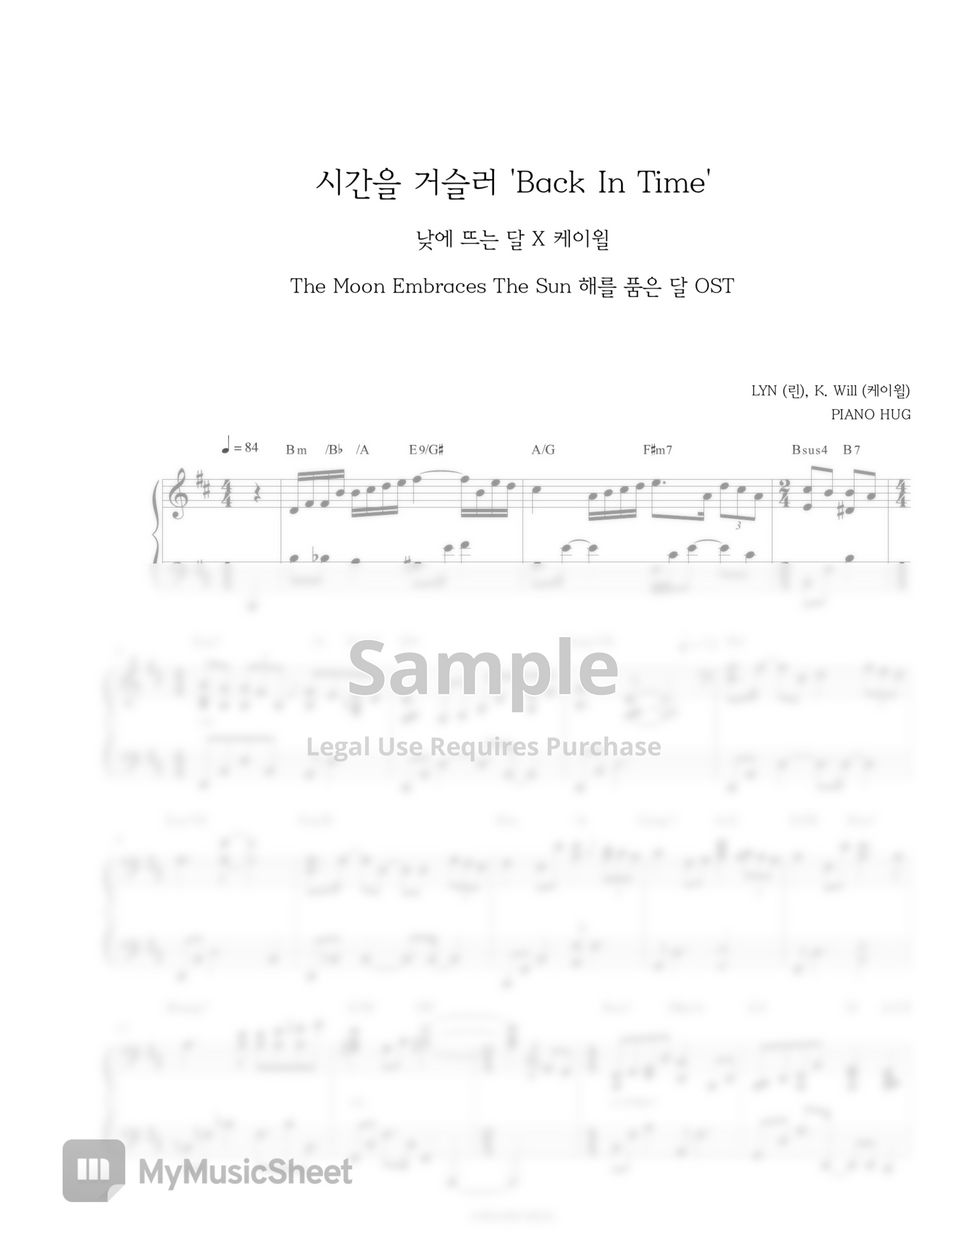 K. Will - Back In The Time (The Moon During The Day) by Piano Hug